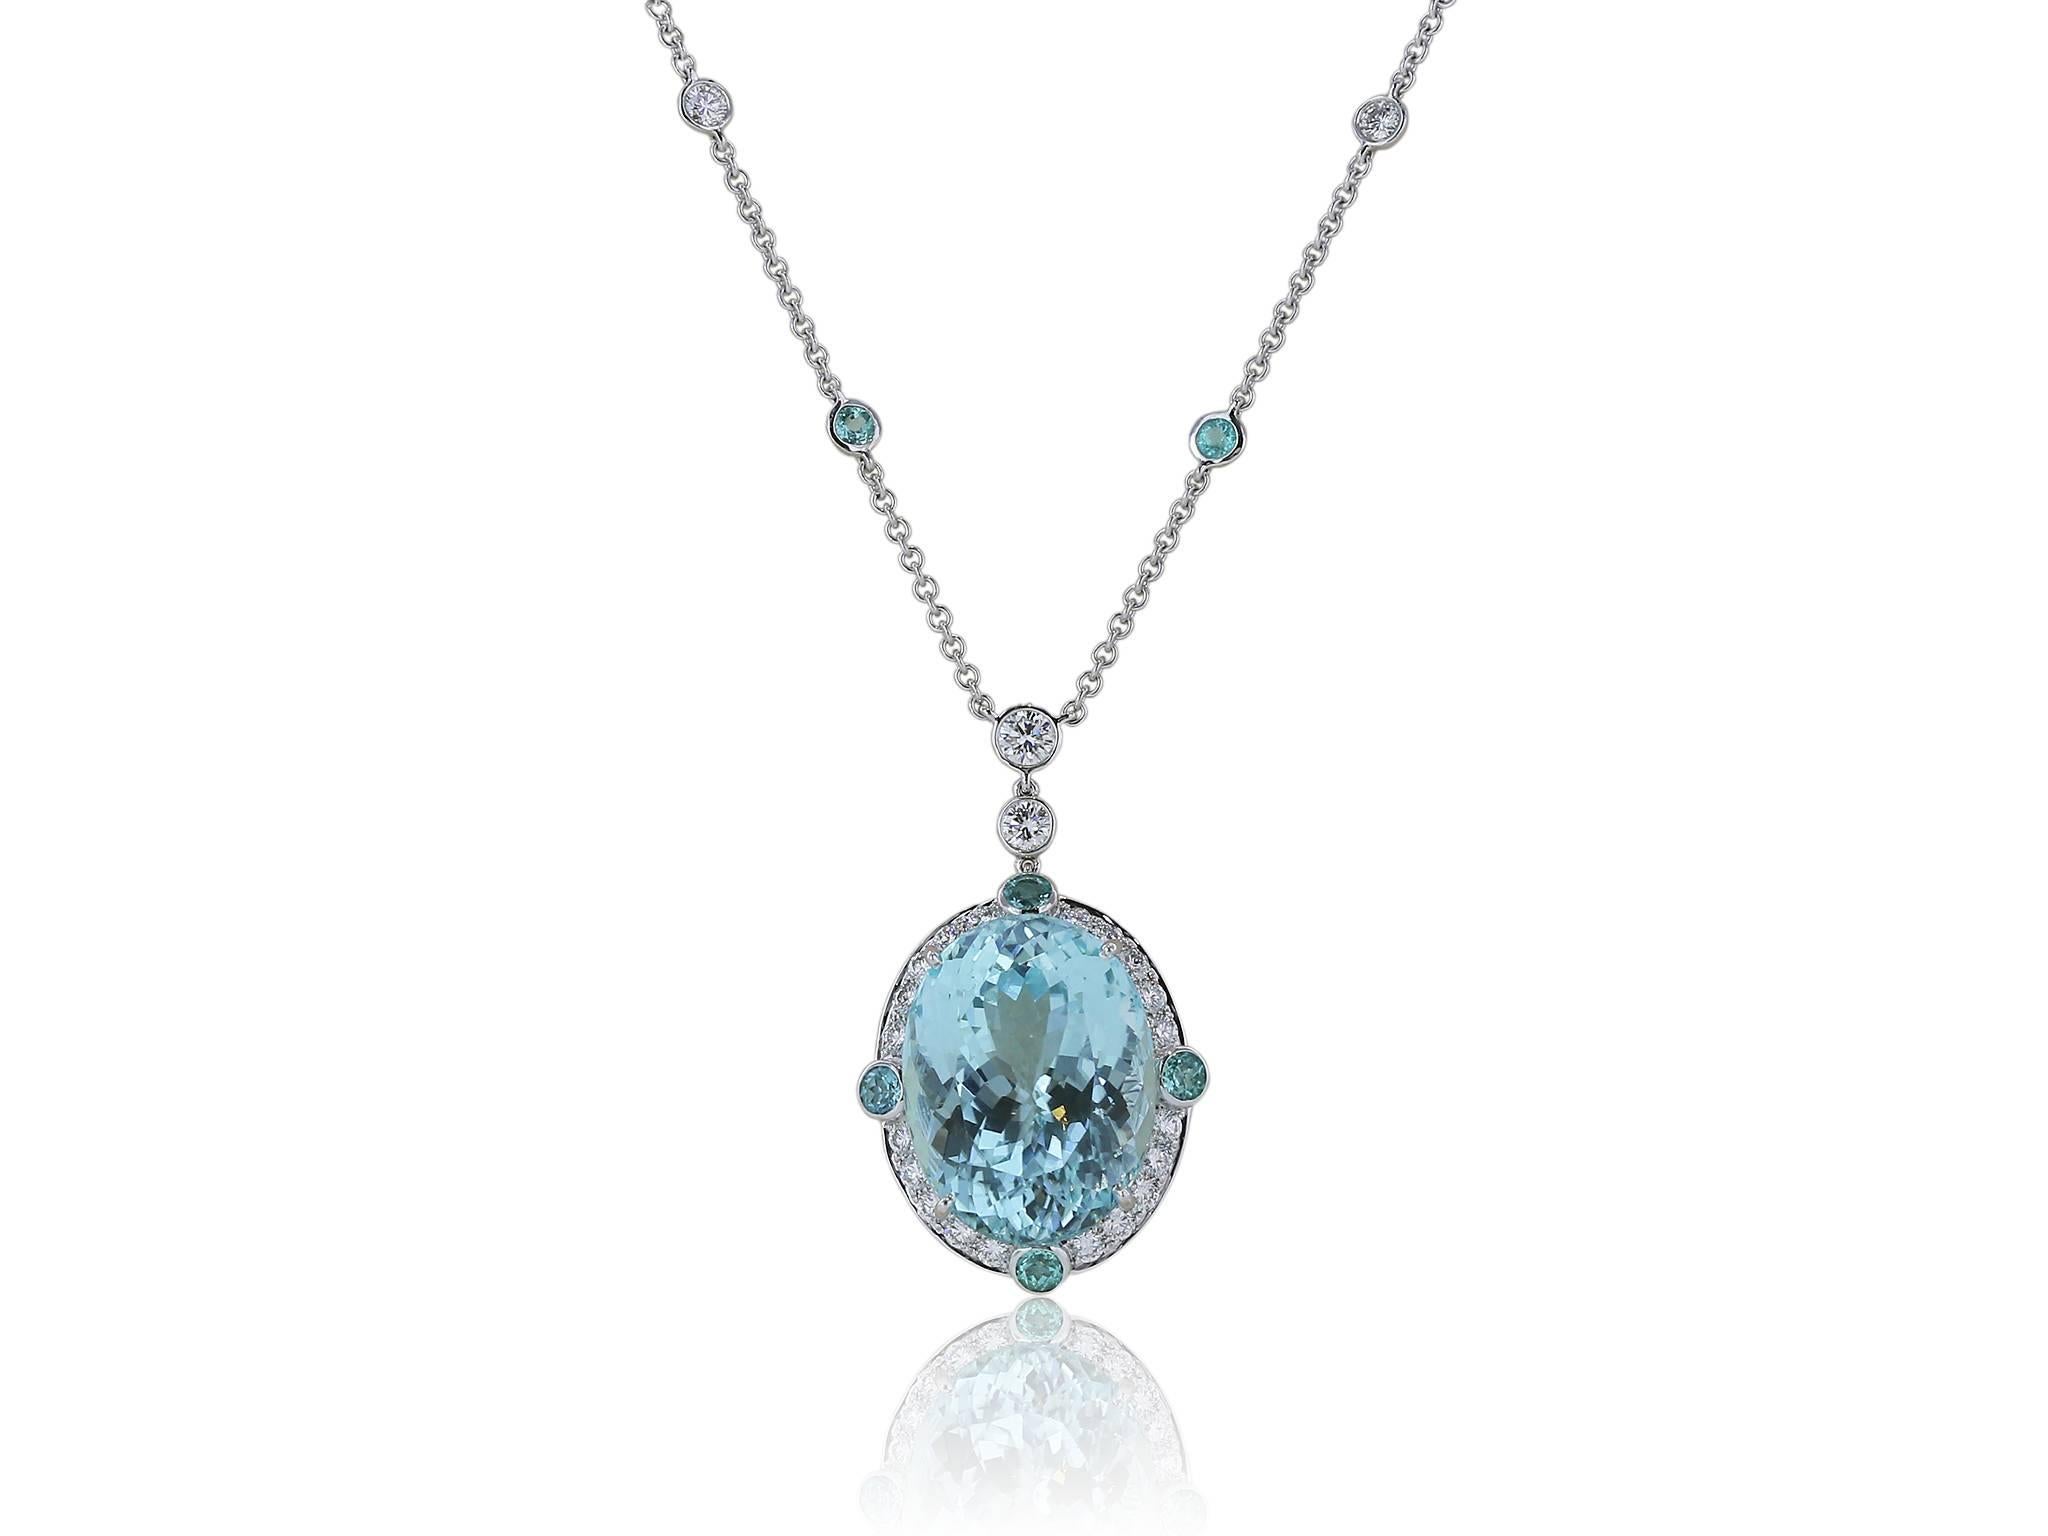 18 karat white gold custom made Paraiba Tourmaline and diamond pendant with chain consisting of one  22.60 cts. oval GIA #2185506310 19.90 x 15.14 x 11.66 mm surrounded by 26 full cut diamonds weighing and 8 round Paraiba Tourmaline having a total